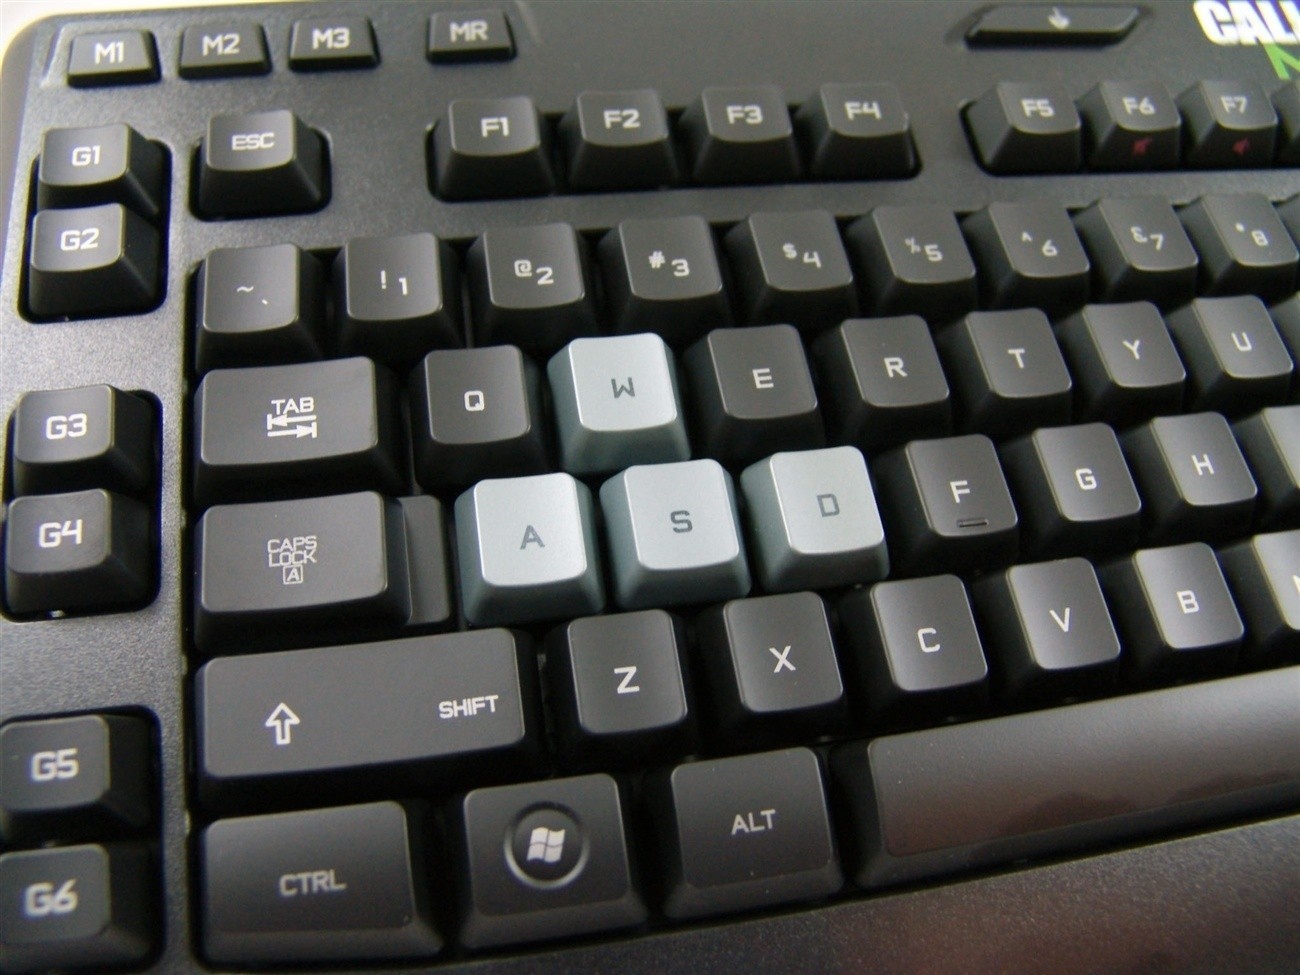 Logitech G105: Made of Duty Gaming Keyboard Review